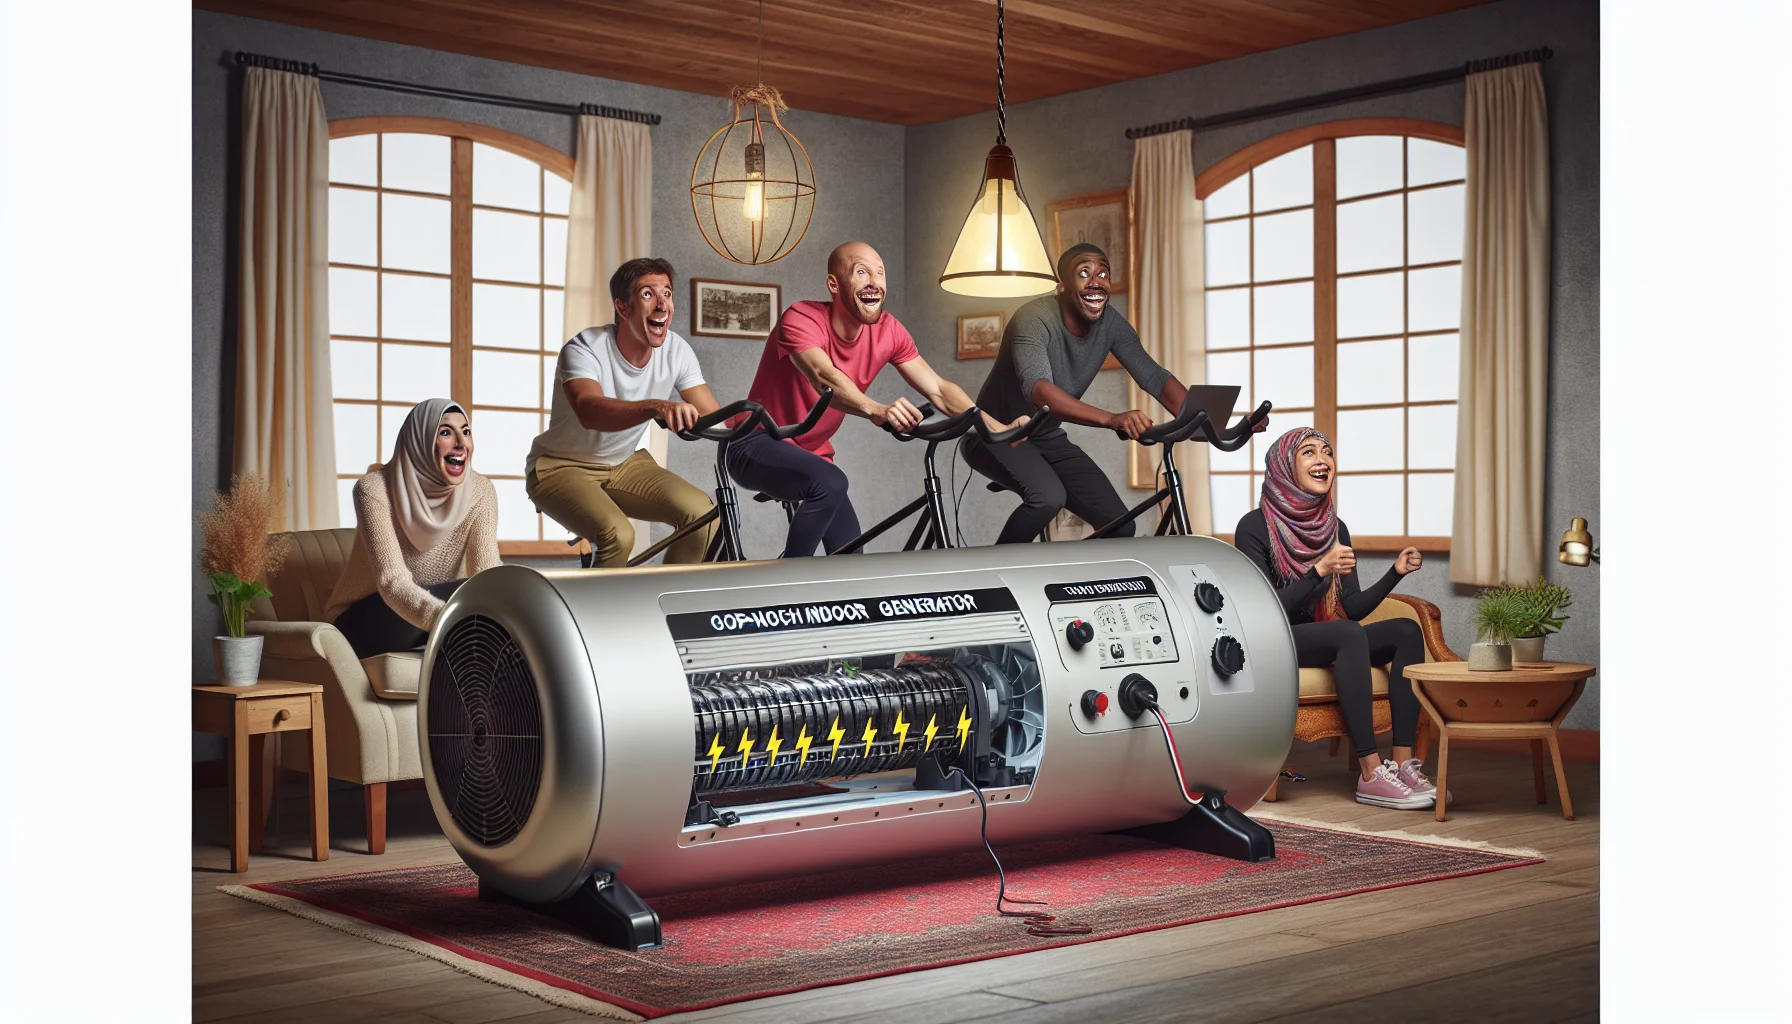 Create an image of a humorous scene in a cozy, well-decorated living room, where an unexpected feature is a top-notch indoor generator. The generator is modern, compact, and shiny silver in color. A group of individuals, a Caucasian woman, a Hispanic man, a Middle-Eastern woman, and a Black man, who appear amused, are enthusiastically pedaling stationary bikes attached to the generator to create electricity. On a side-table is a lamp connected to the generator, brightened by the power created by their pedaling. The scene demonstrates in a fun way how indoor generators can be used to generate electricity.